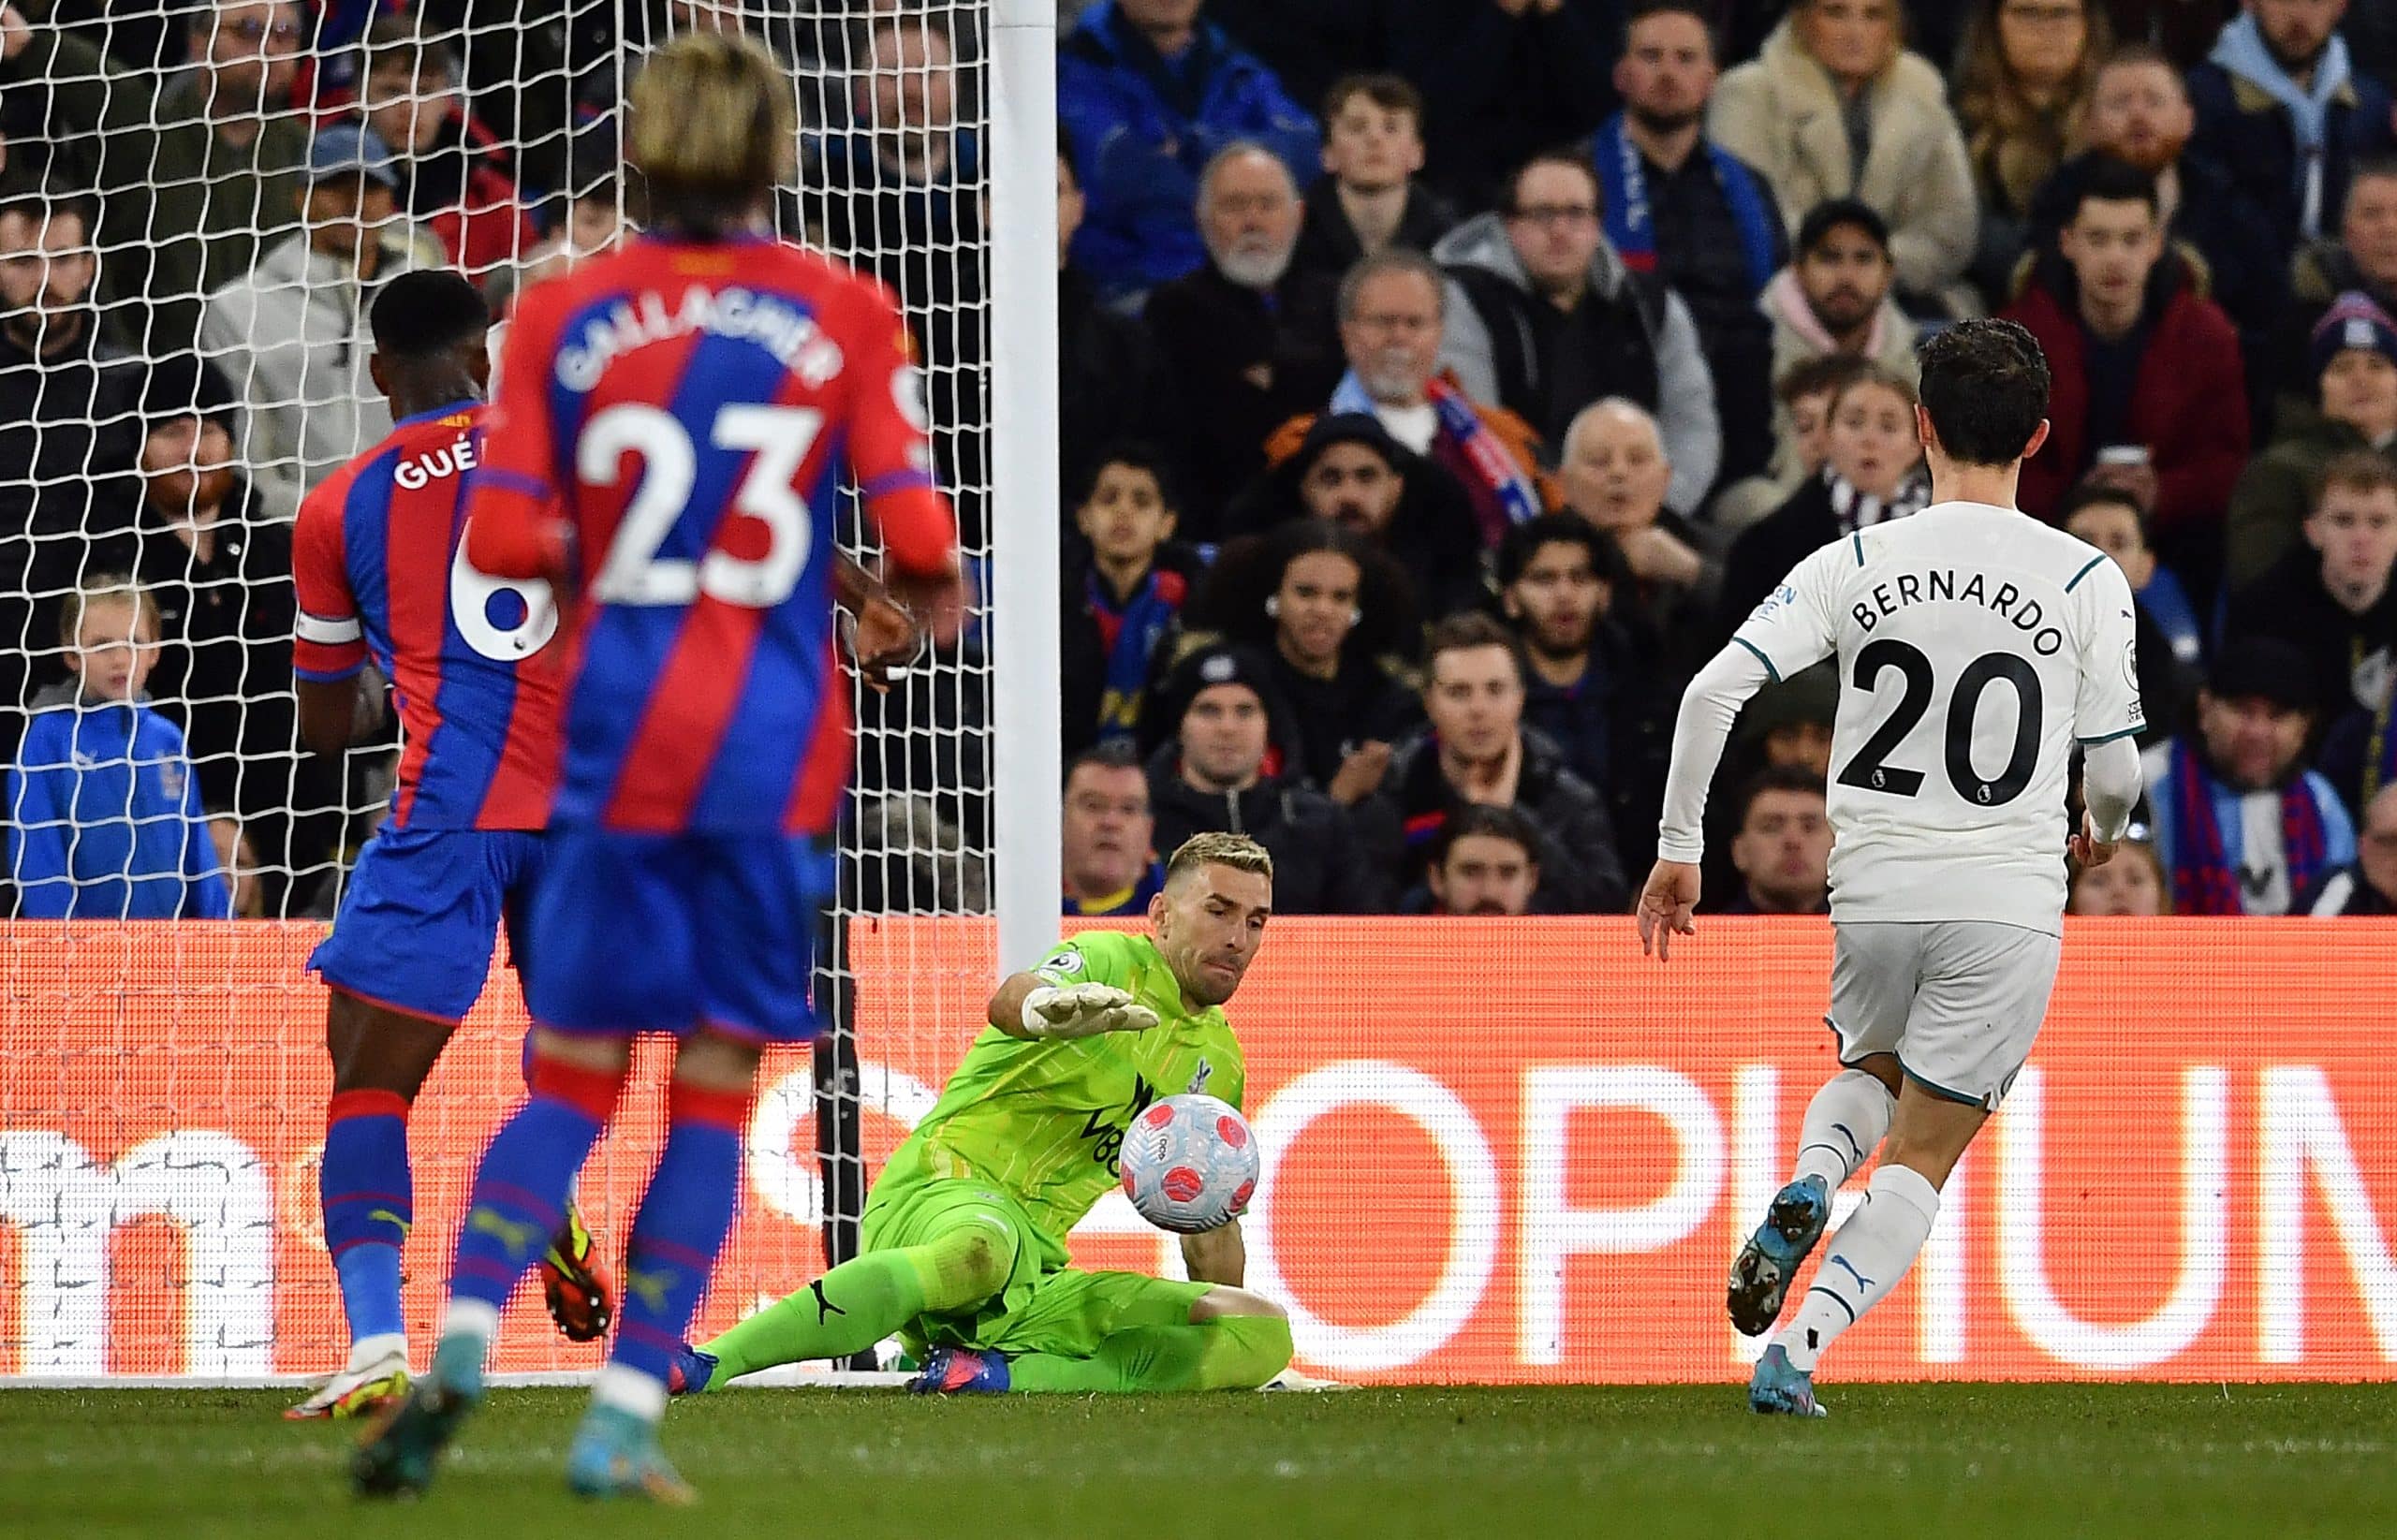 You are currently viewing Highlights and reactions as Palace hold Man City at Selhurst Park